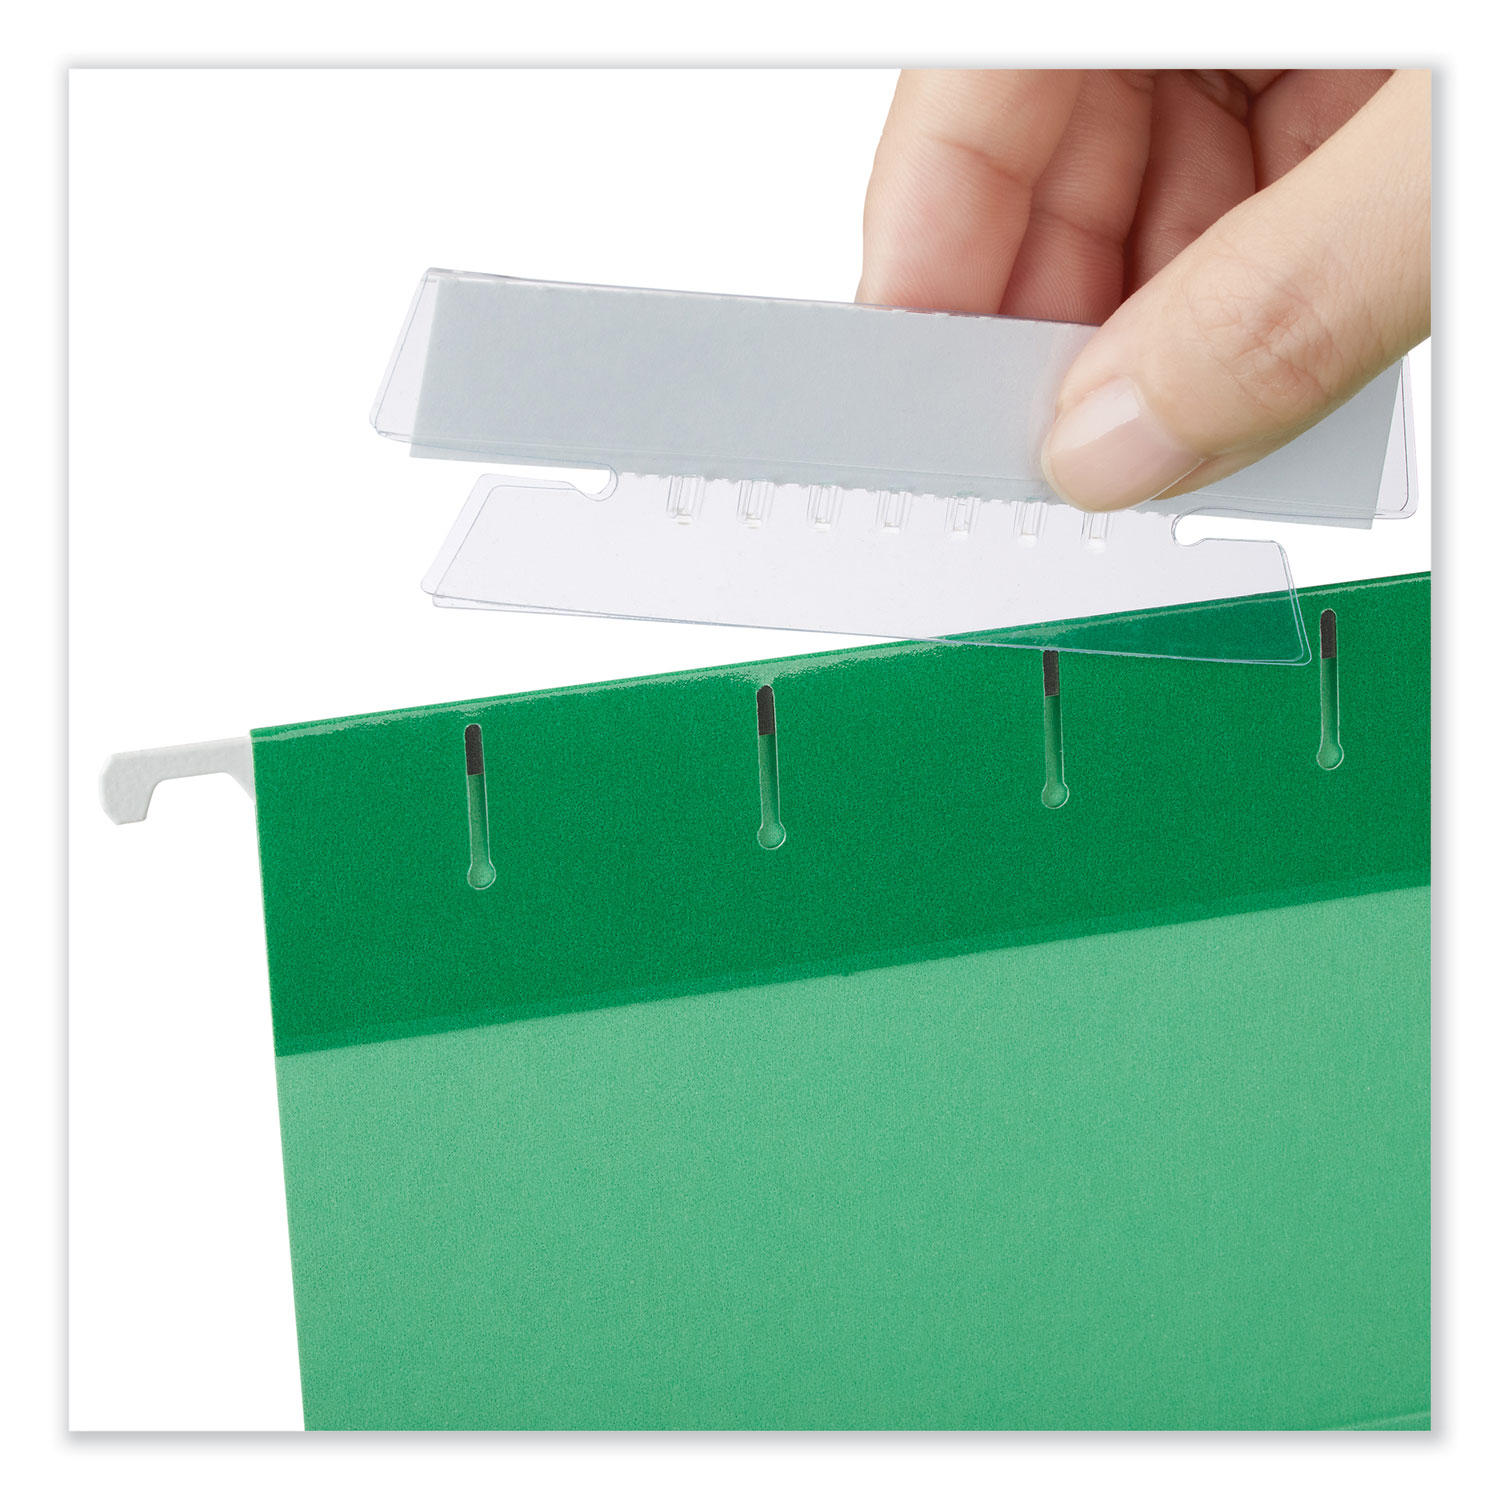 11X17 Hanging File Folders (25 Pack) Includes White Metal Rod Hangers,  Plastic Label Tabs & Label Cards